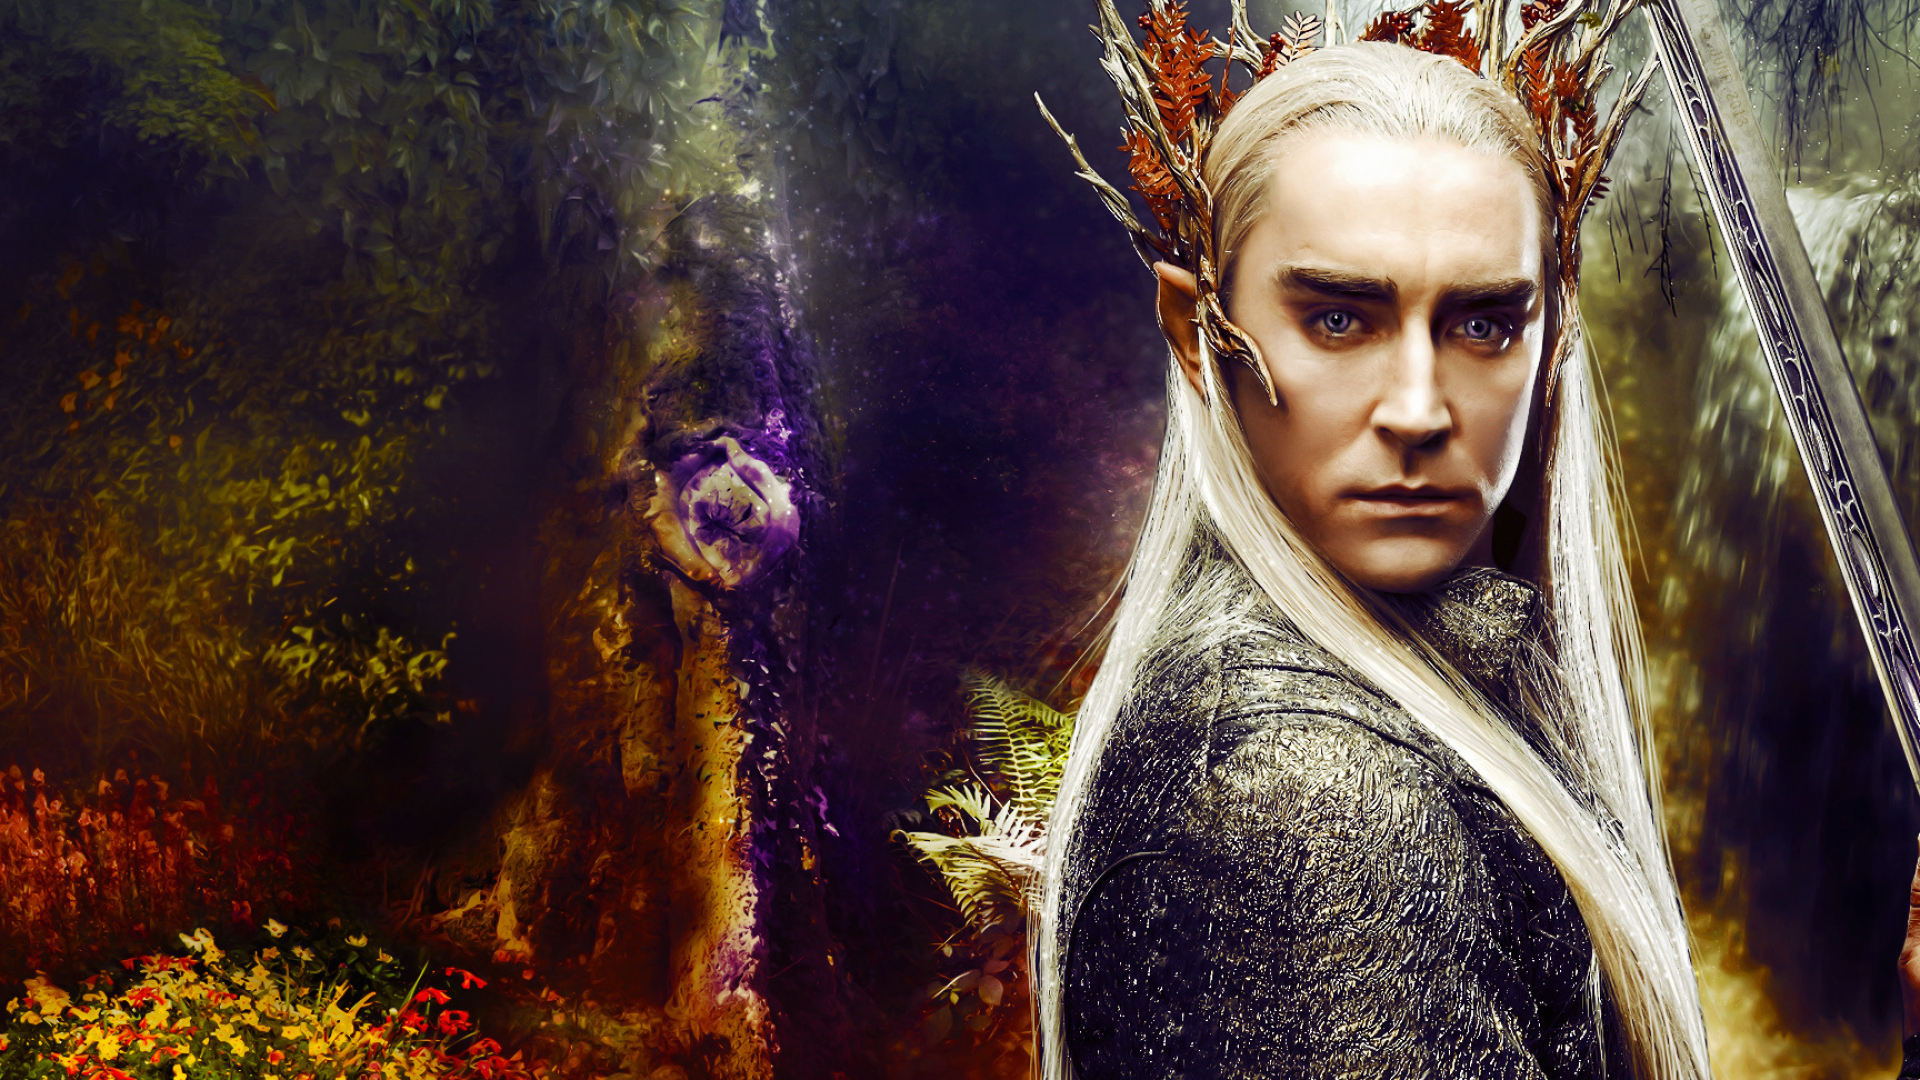 Thranduil images, Elven warrior, Weapon collection, Movie references, 1920x1080 Full HD Desktop